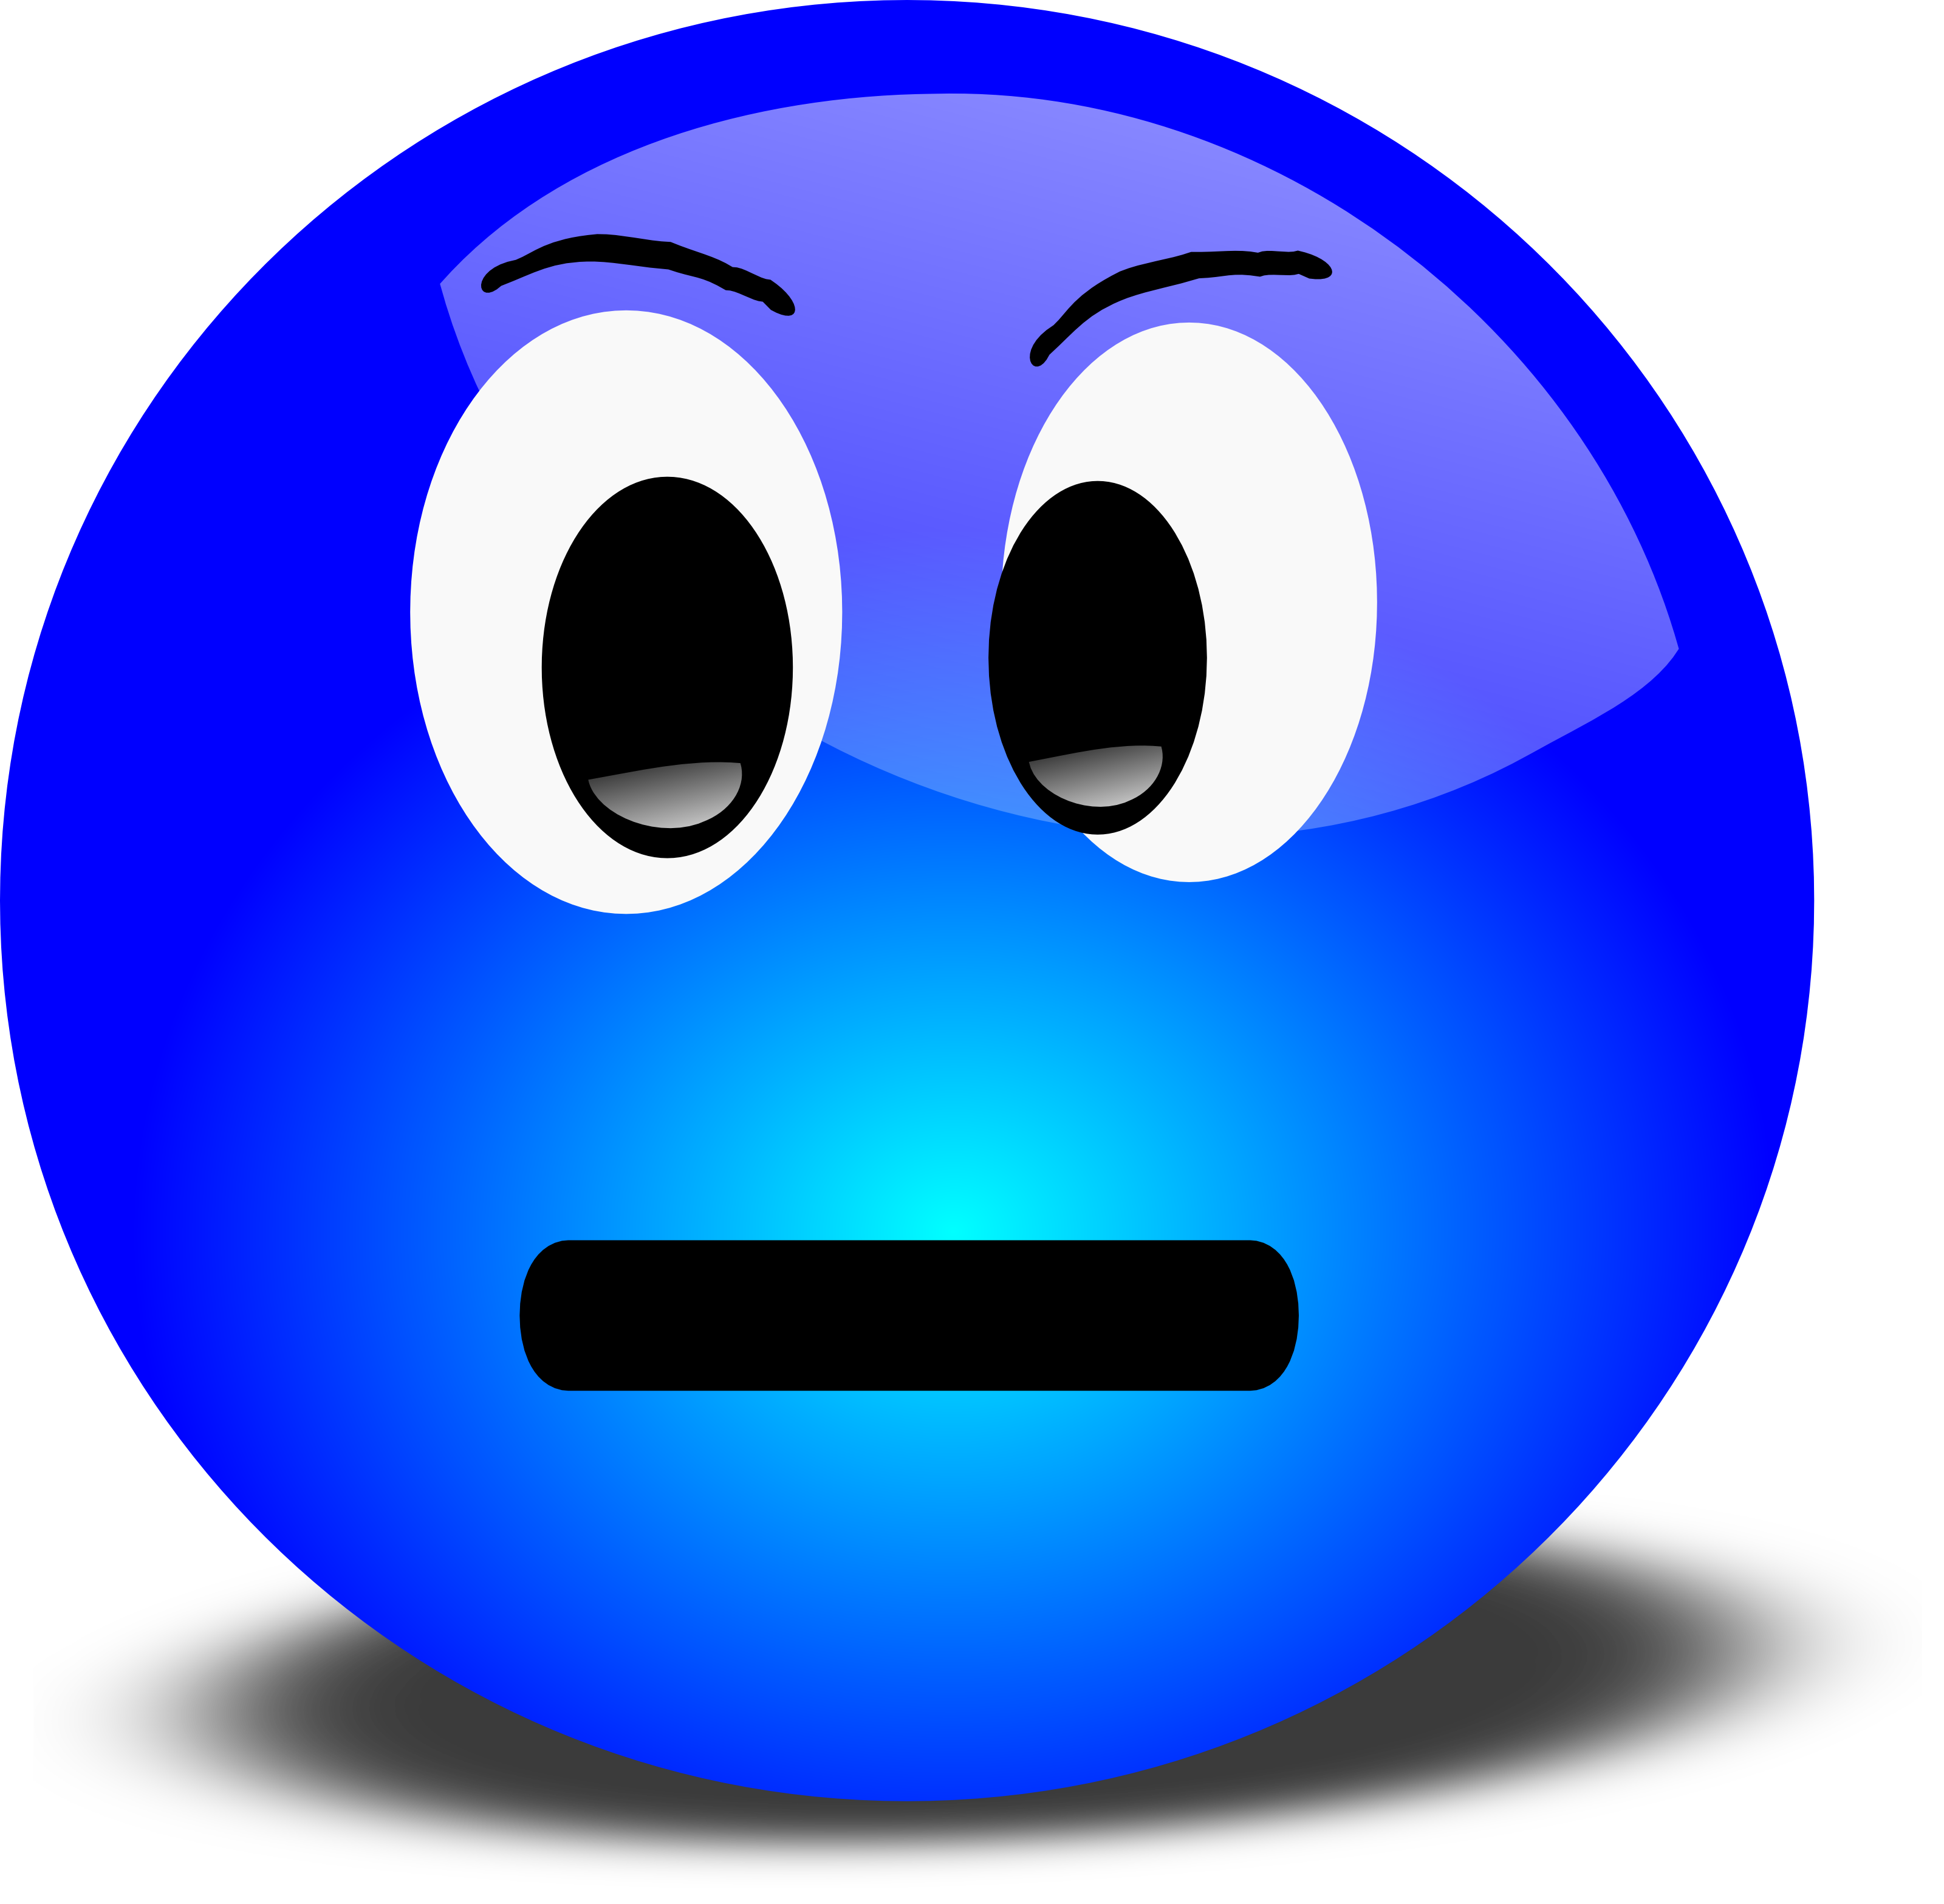 Free 3D Disgruntled Smiley Face Clipart Illustration